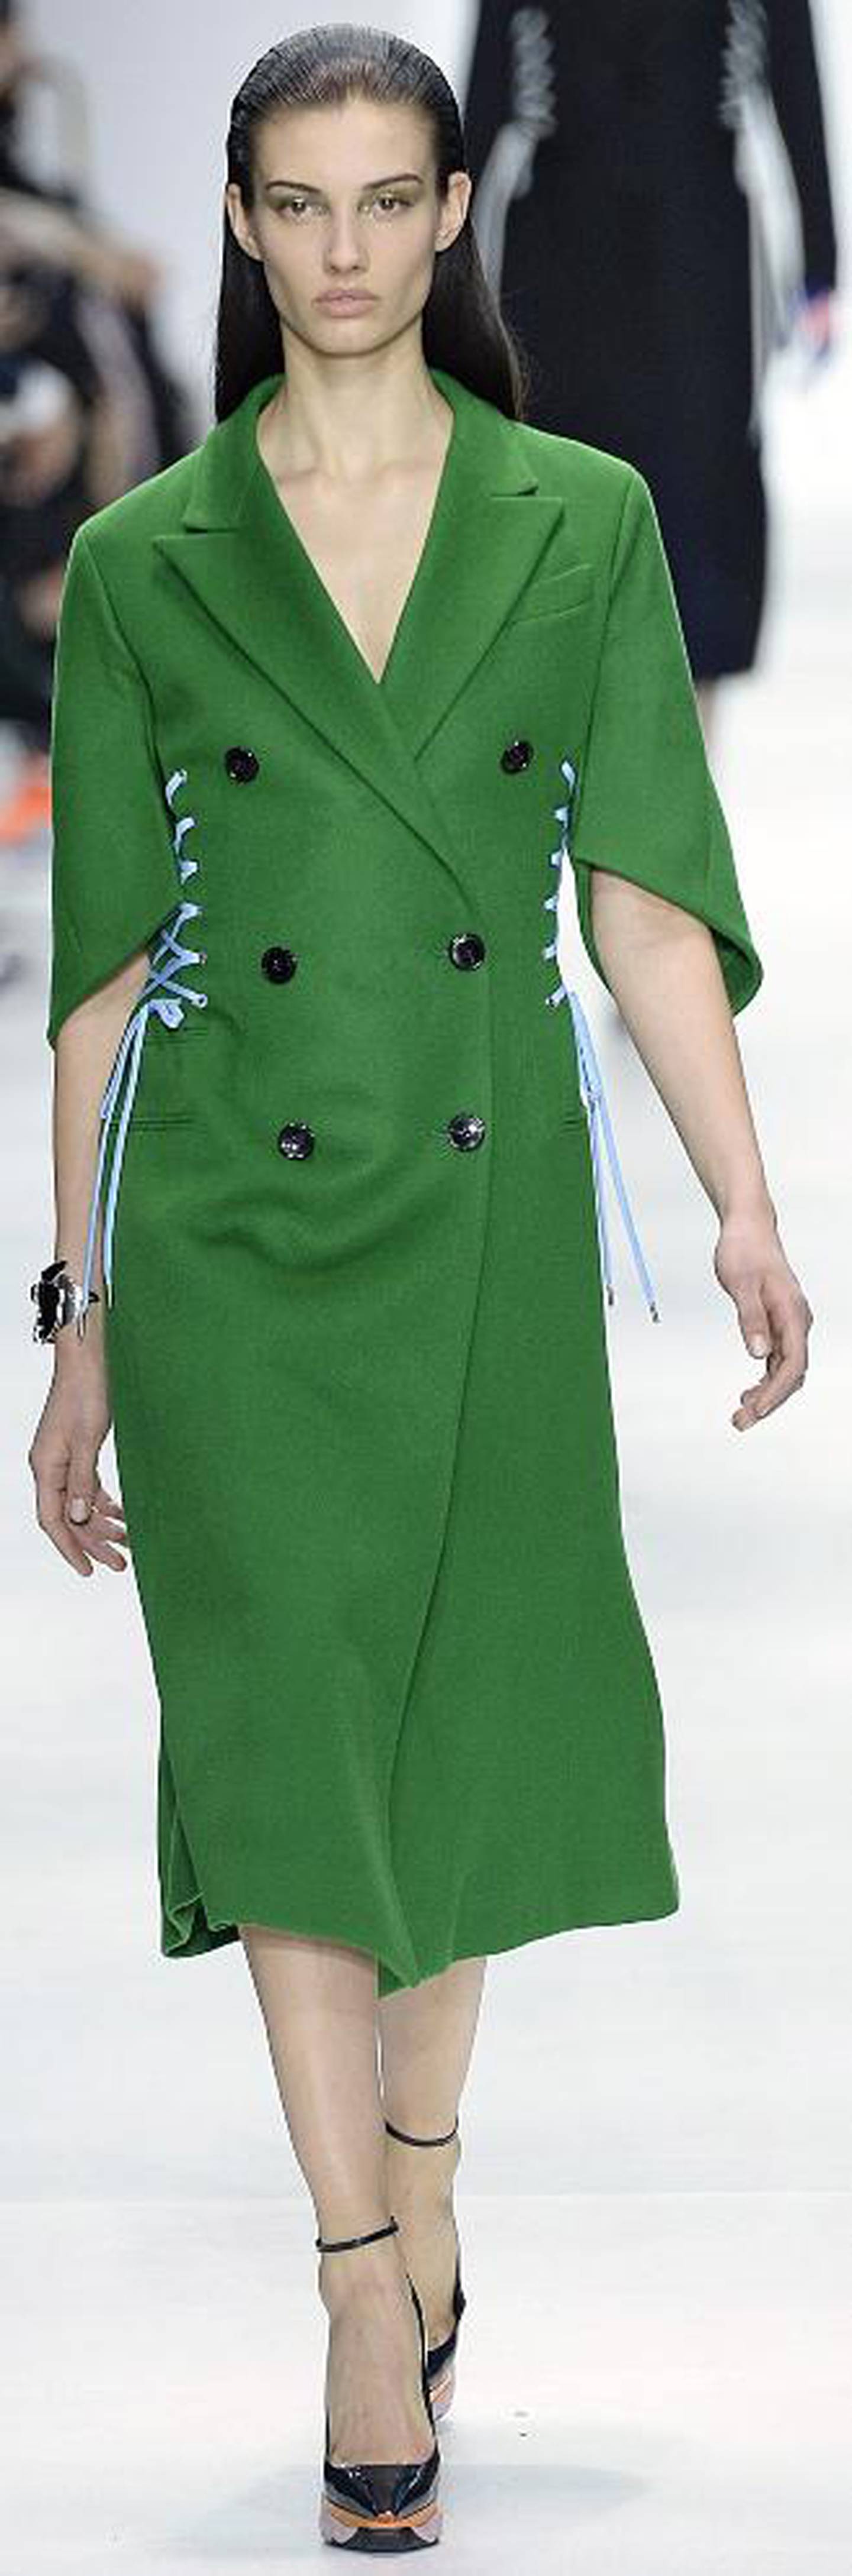 Trending in fashion: the colour green – The Irish Times